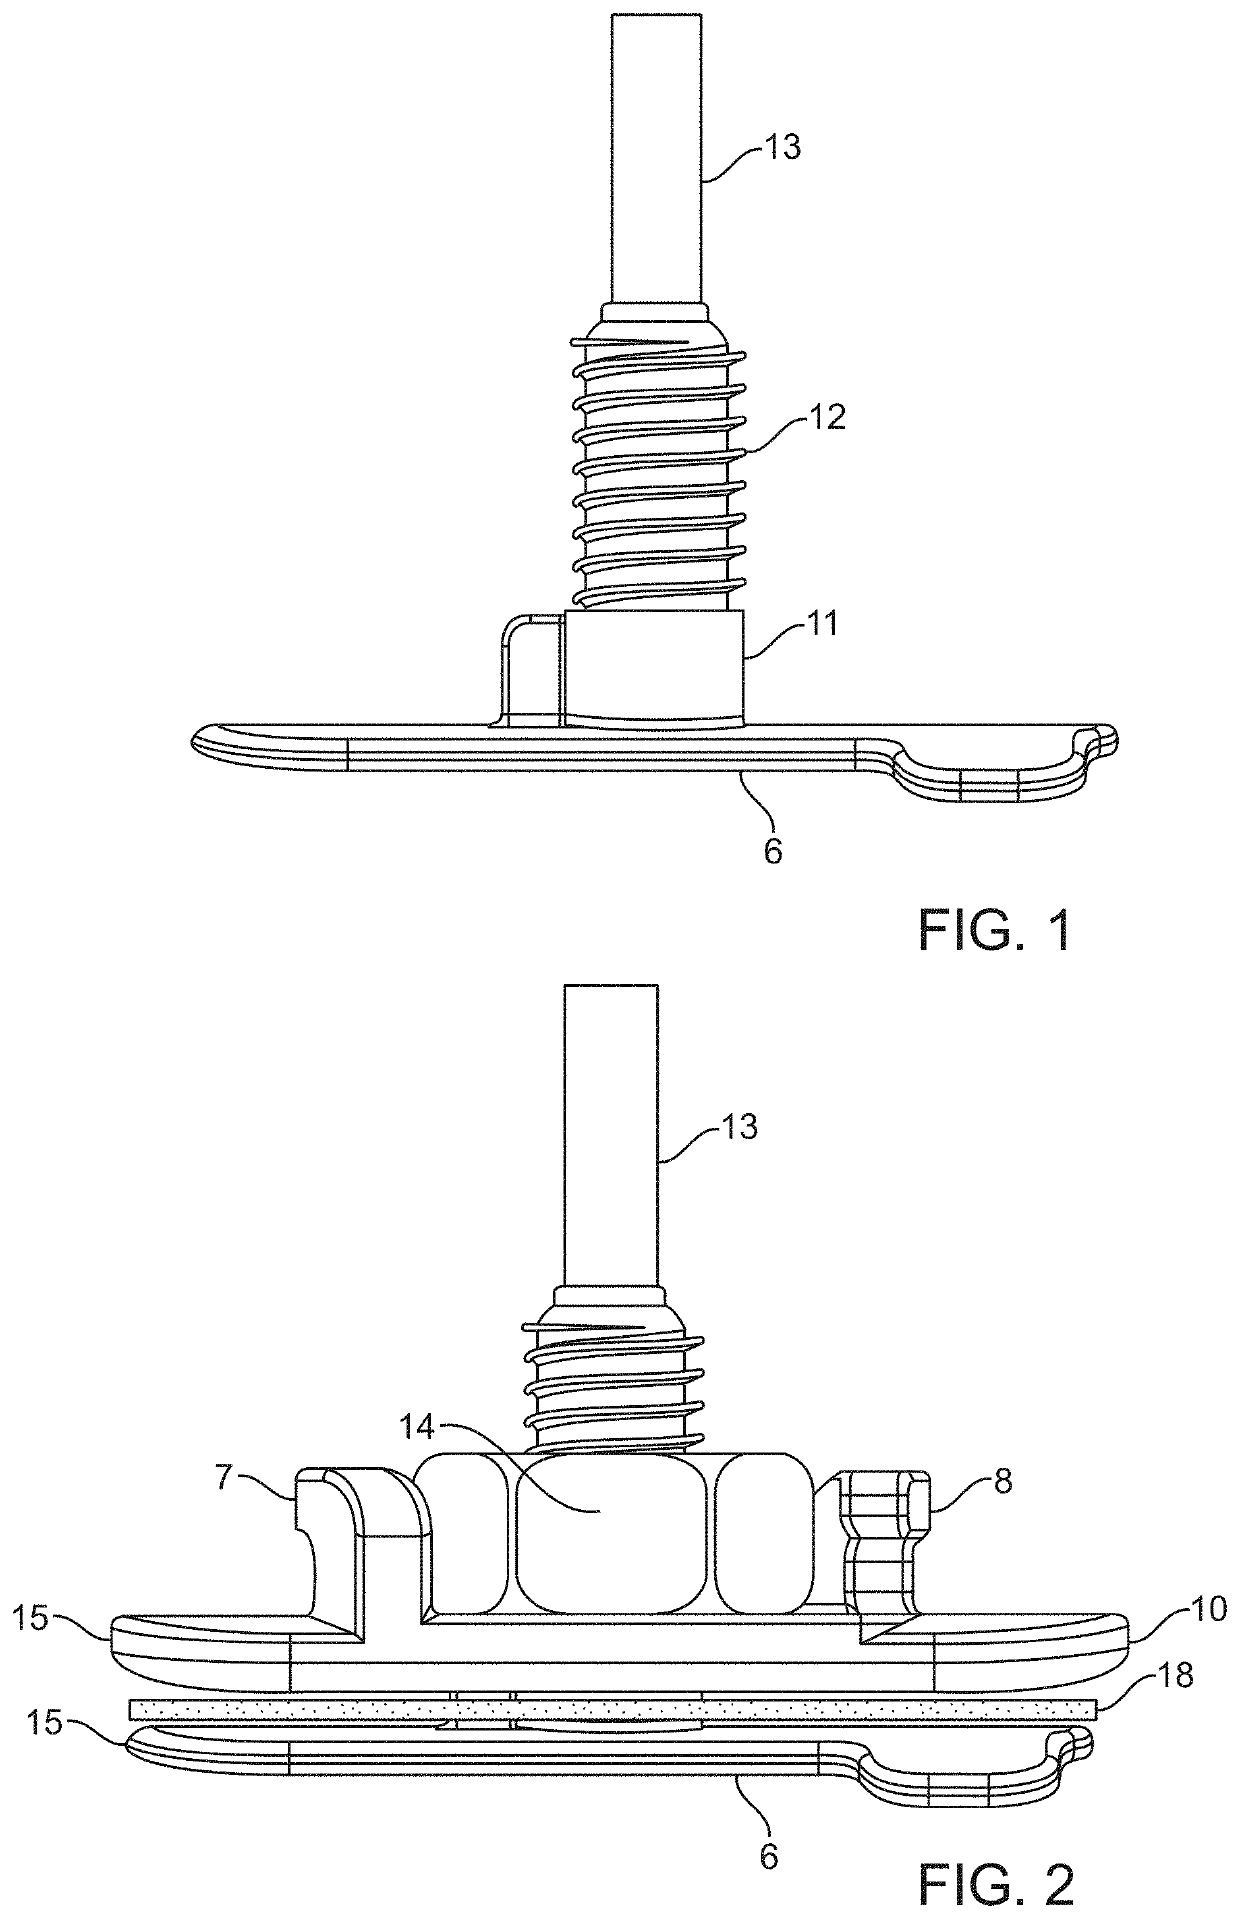 Transdural electrode device for stimulation of the spinal cord